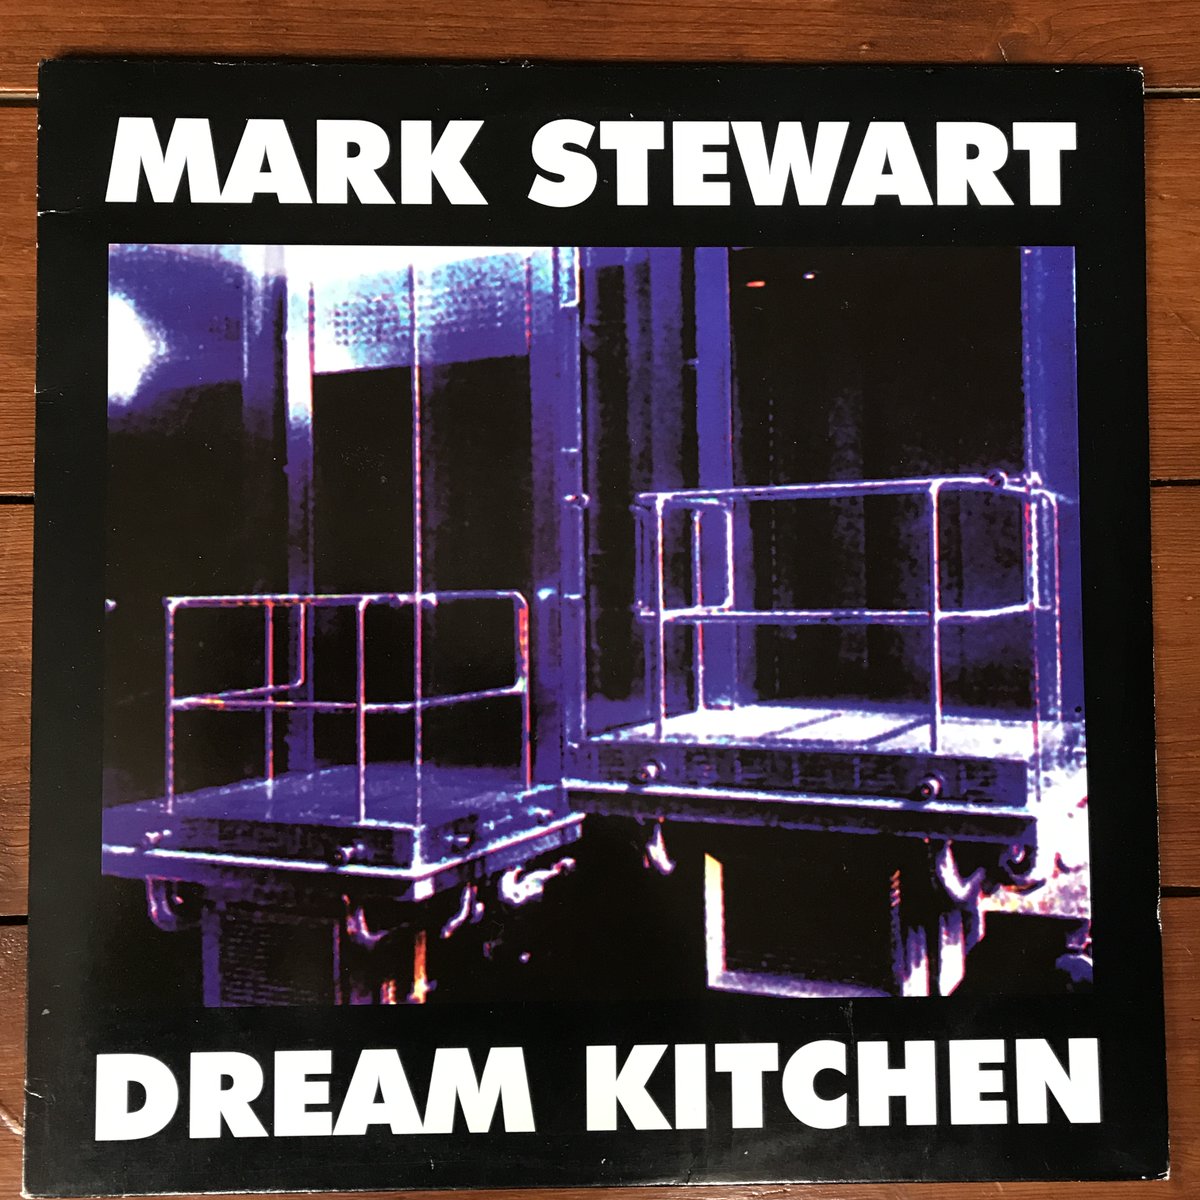 Didn't even know this @_markstewart existed on vinyl. Promo edition on @MuteUK arrived today. #AdrianSherwood production and #KeithLeBlanc guest.

#Consumed #ObjectsCareToo #ControlData